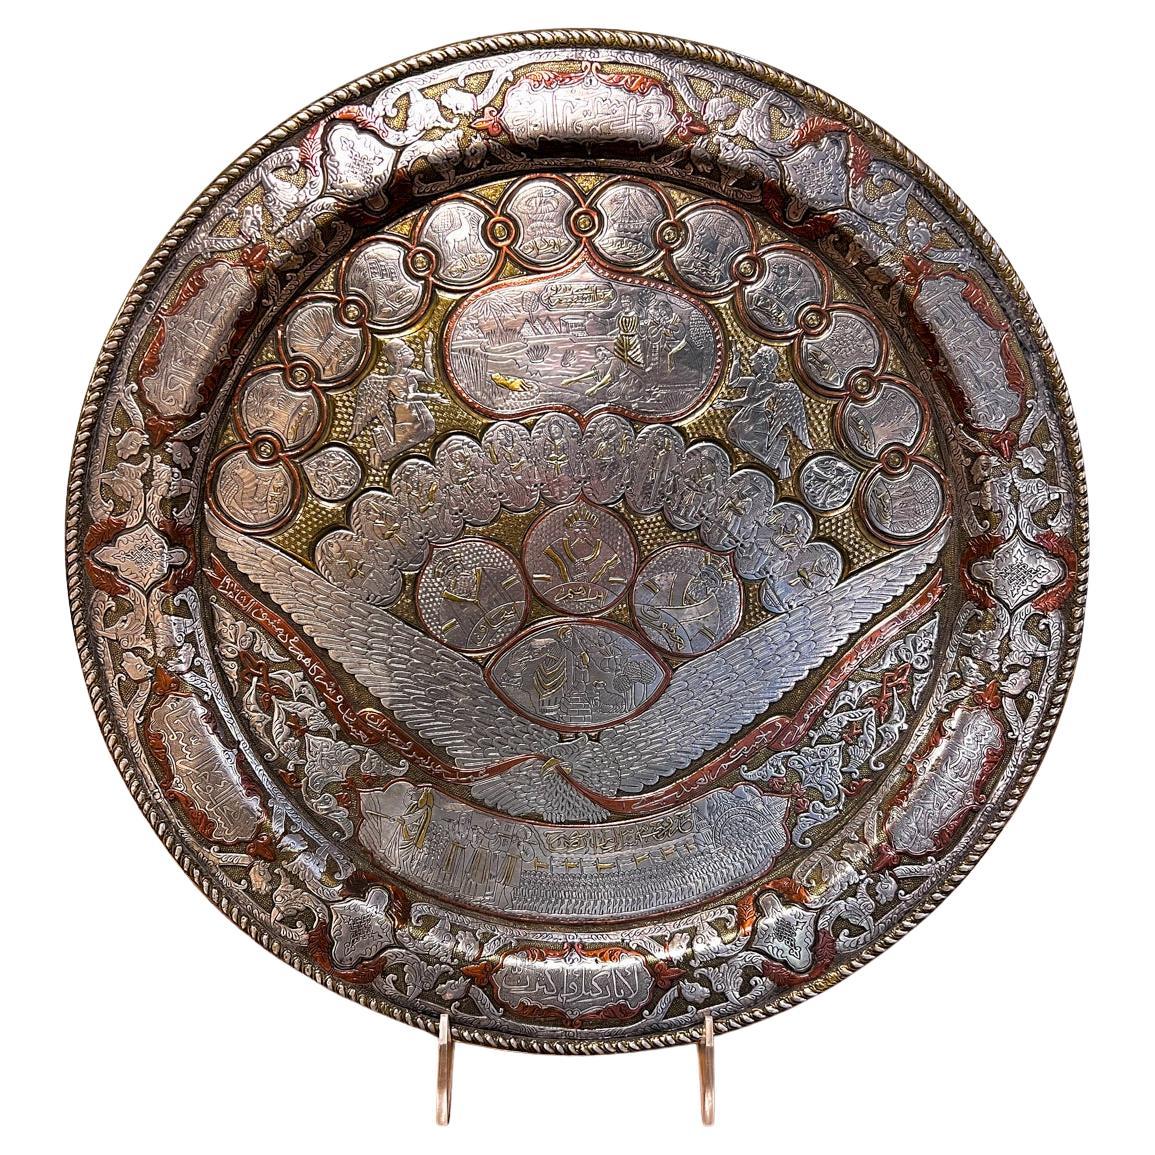 A Damascened Silver, Copper and Gold Plate with Old Testament Scenes 